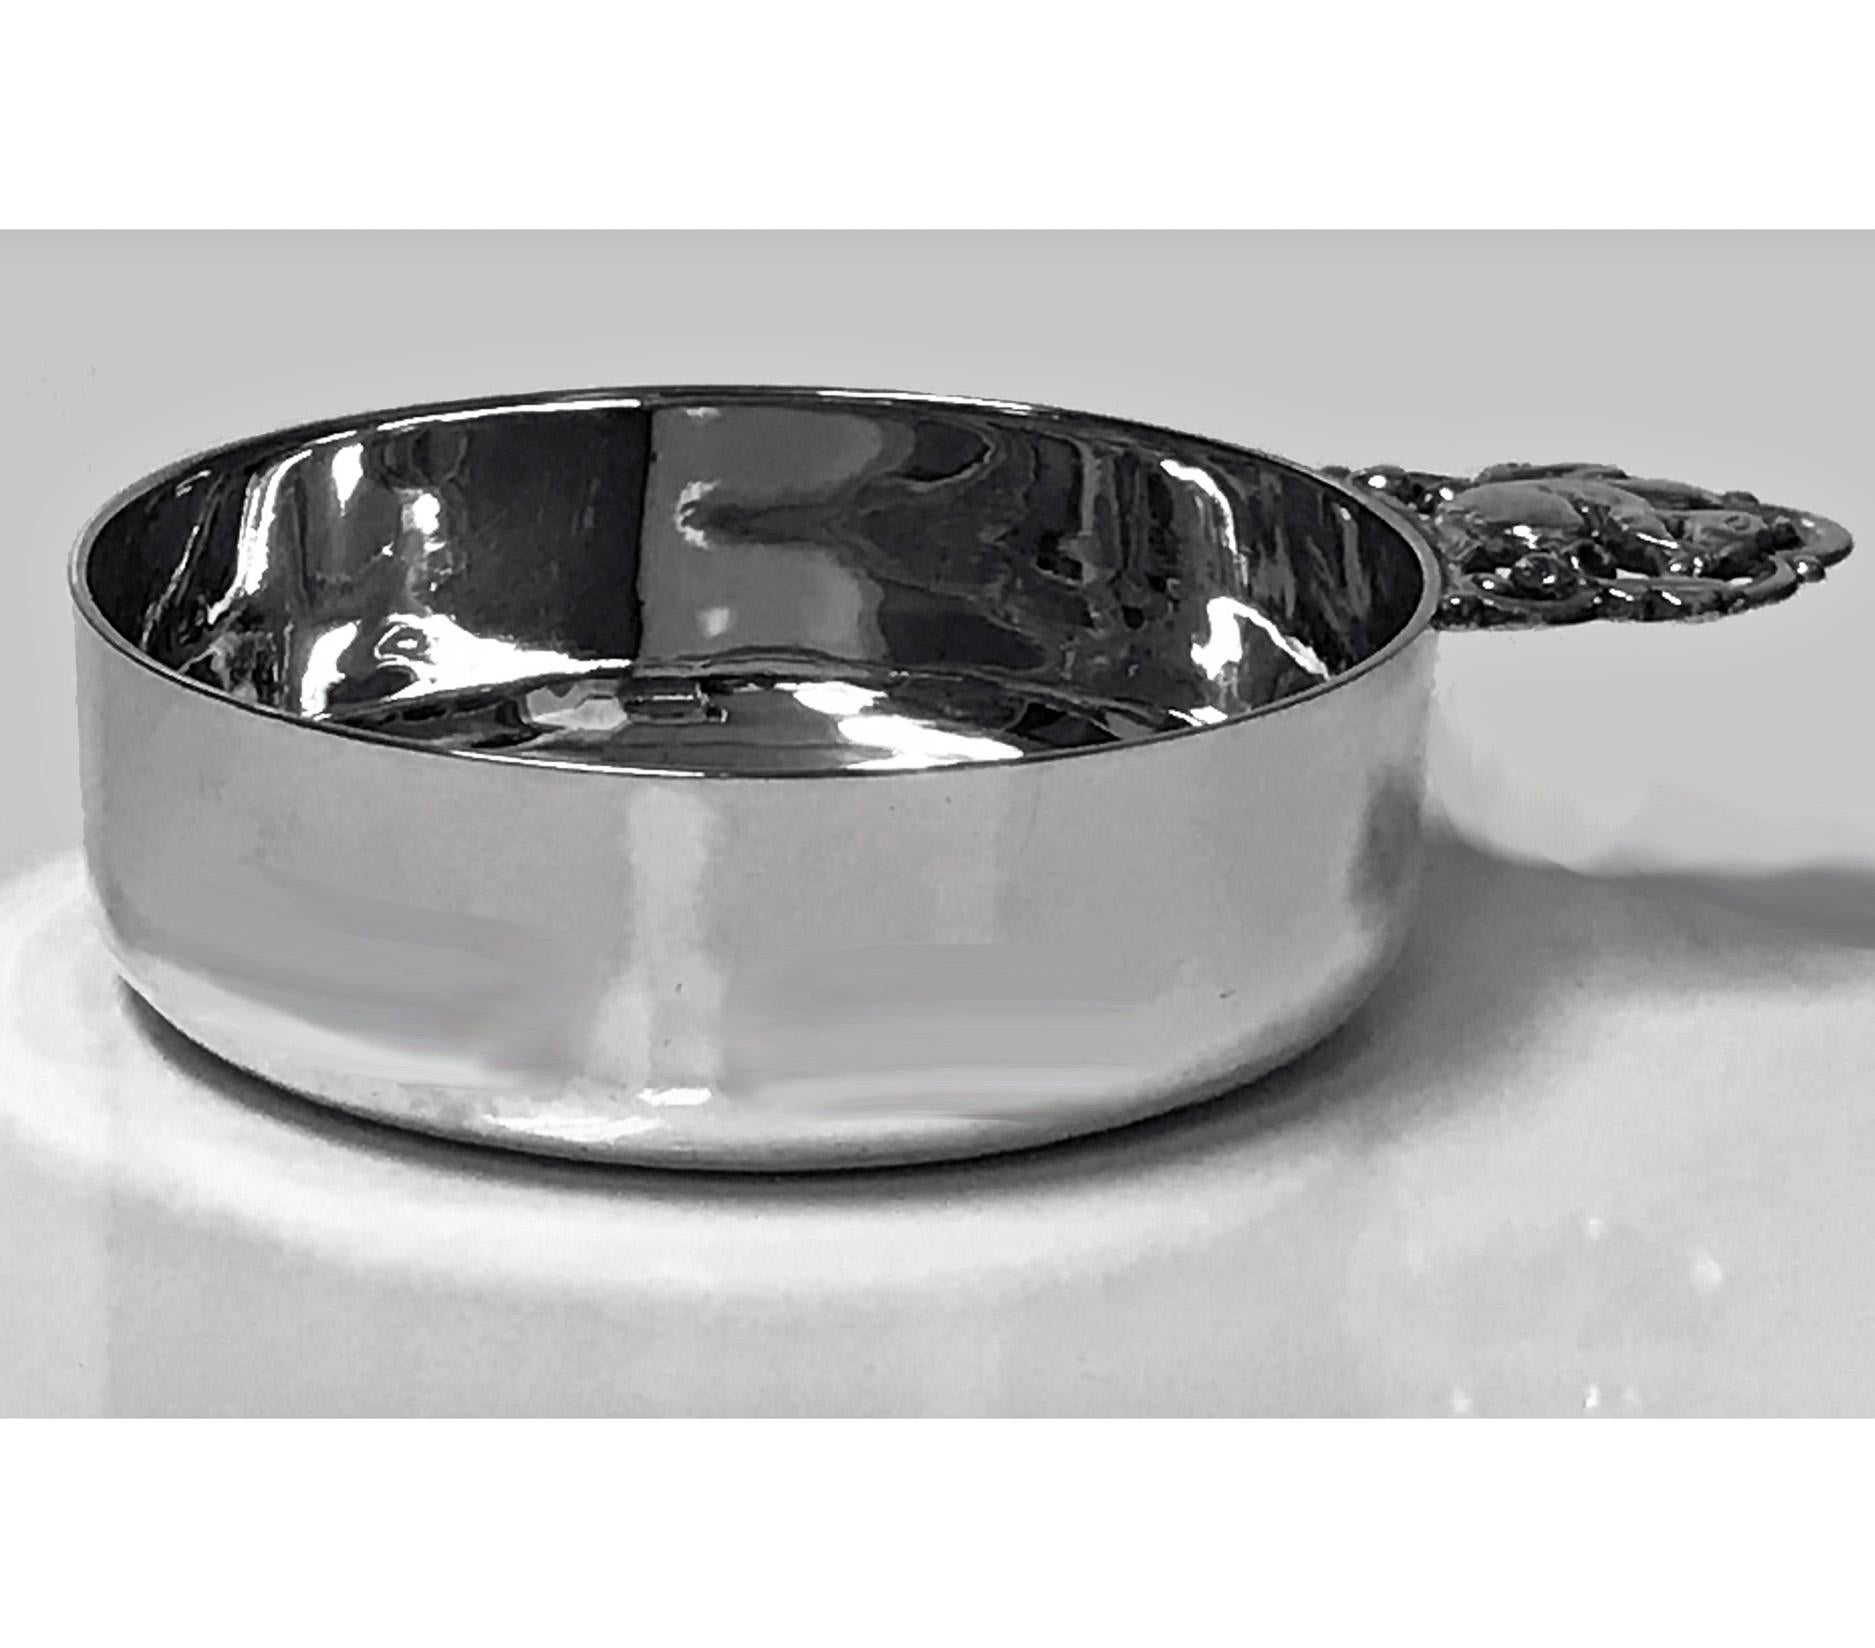 Tiffany & Co. sterling silver porringer with squirrel handle, 1907-1938. Solid and heavy, plain with squirrel handle with oak leaves and acorns. Stamped Tiffany & Co. Makers Sterling Silver 23111 with m mark for 1907-1938. Measures: Length 6 inches,